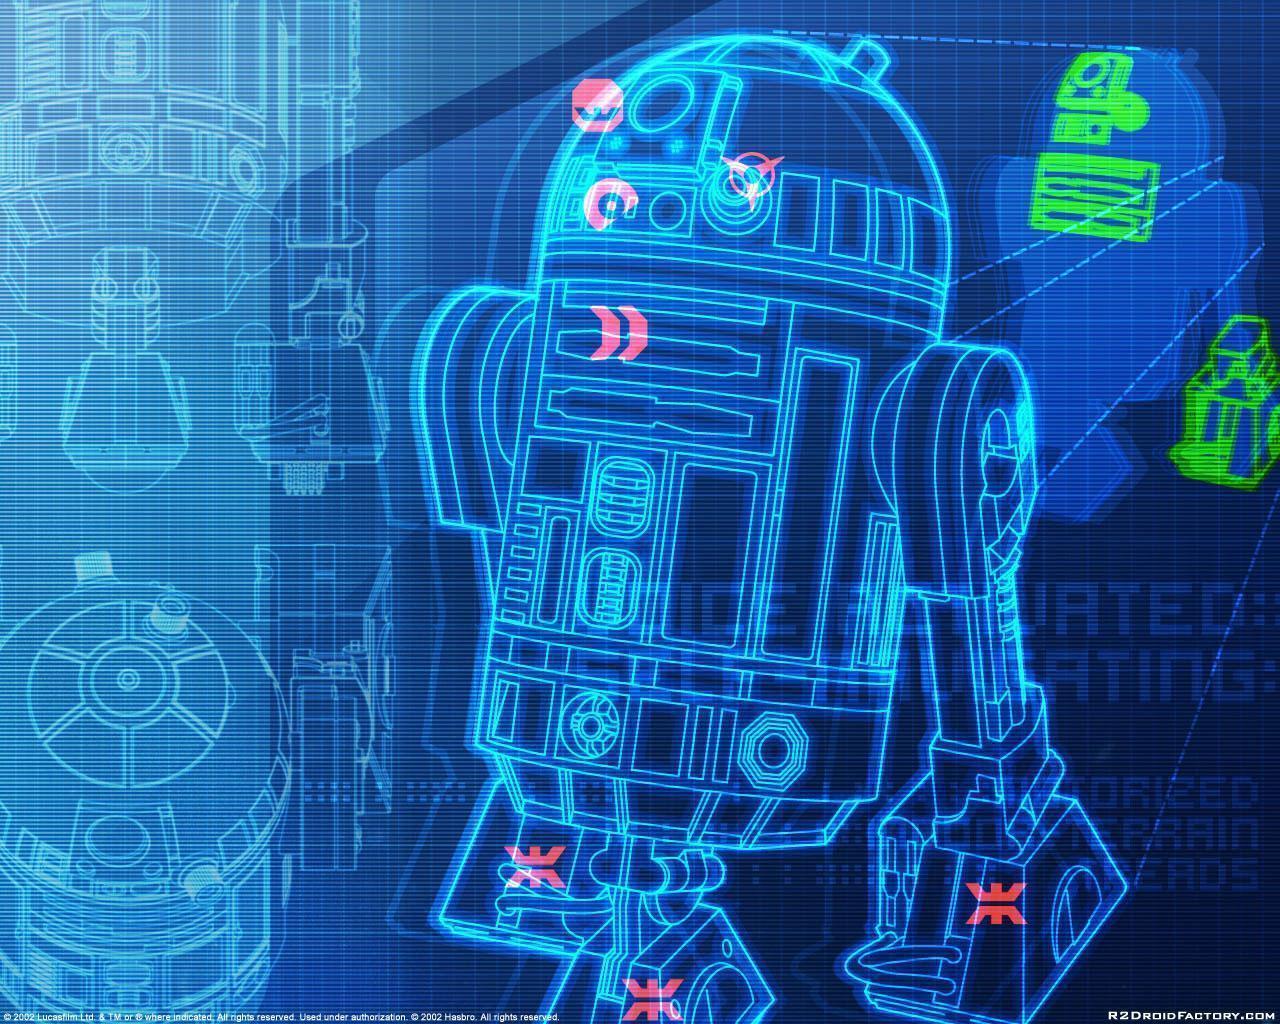 image For > R2d2 Wallpaper HD